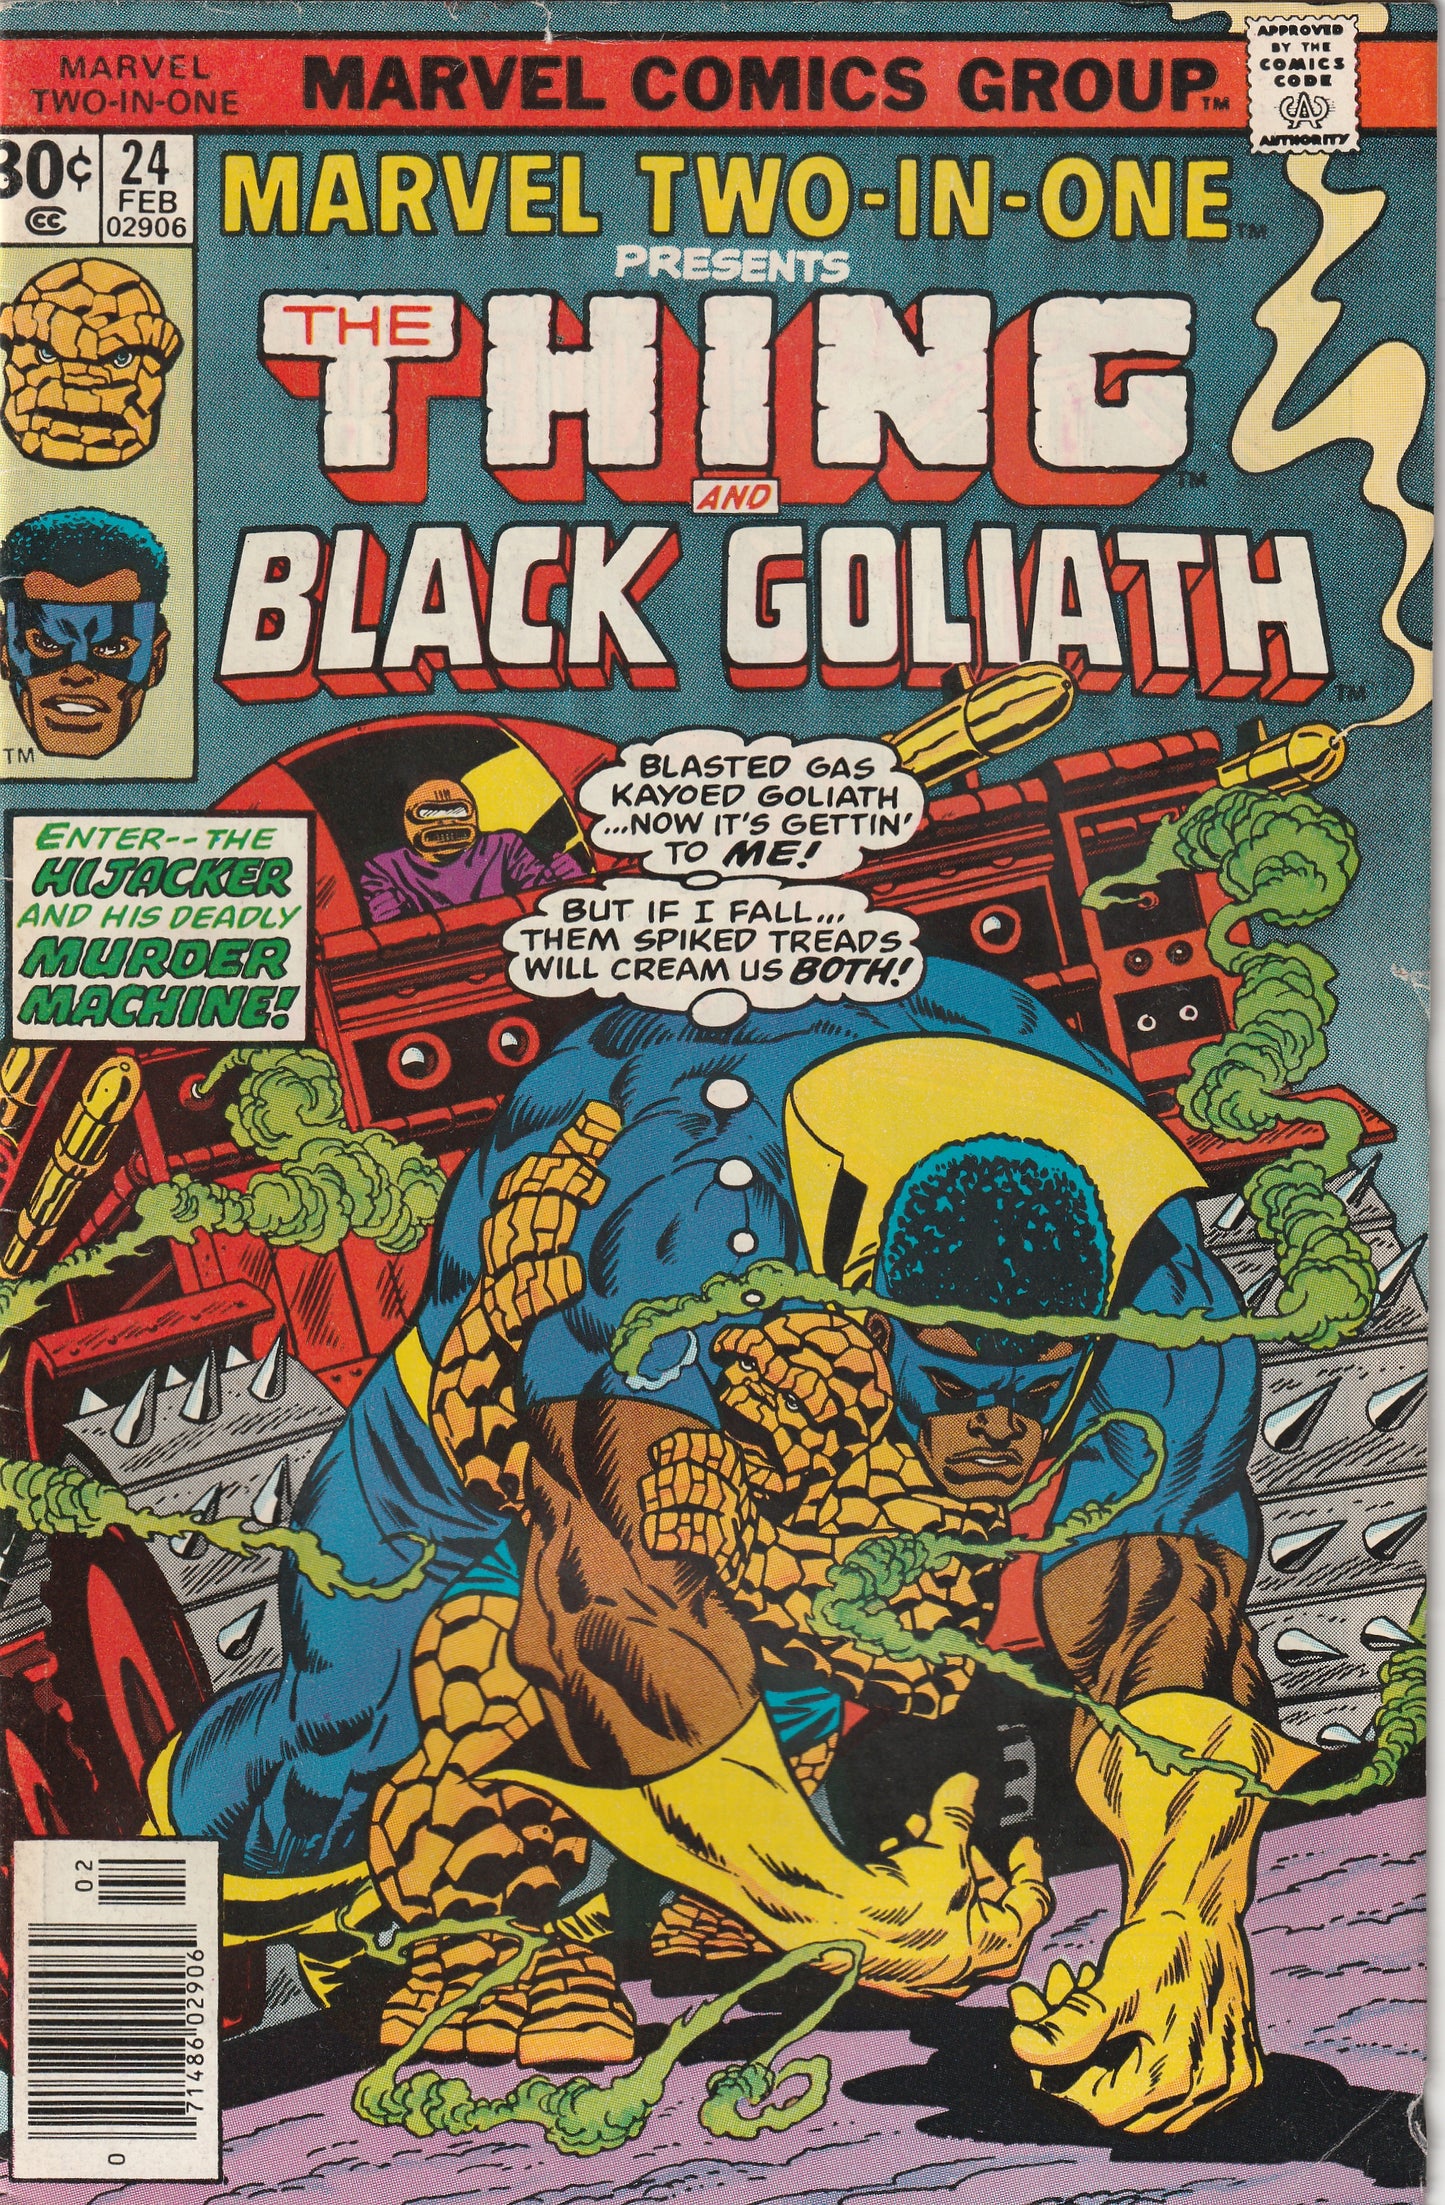 Marvel Two-in-One #24 (1977) - The Thing and Black Goliath